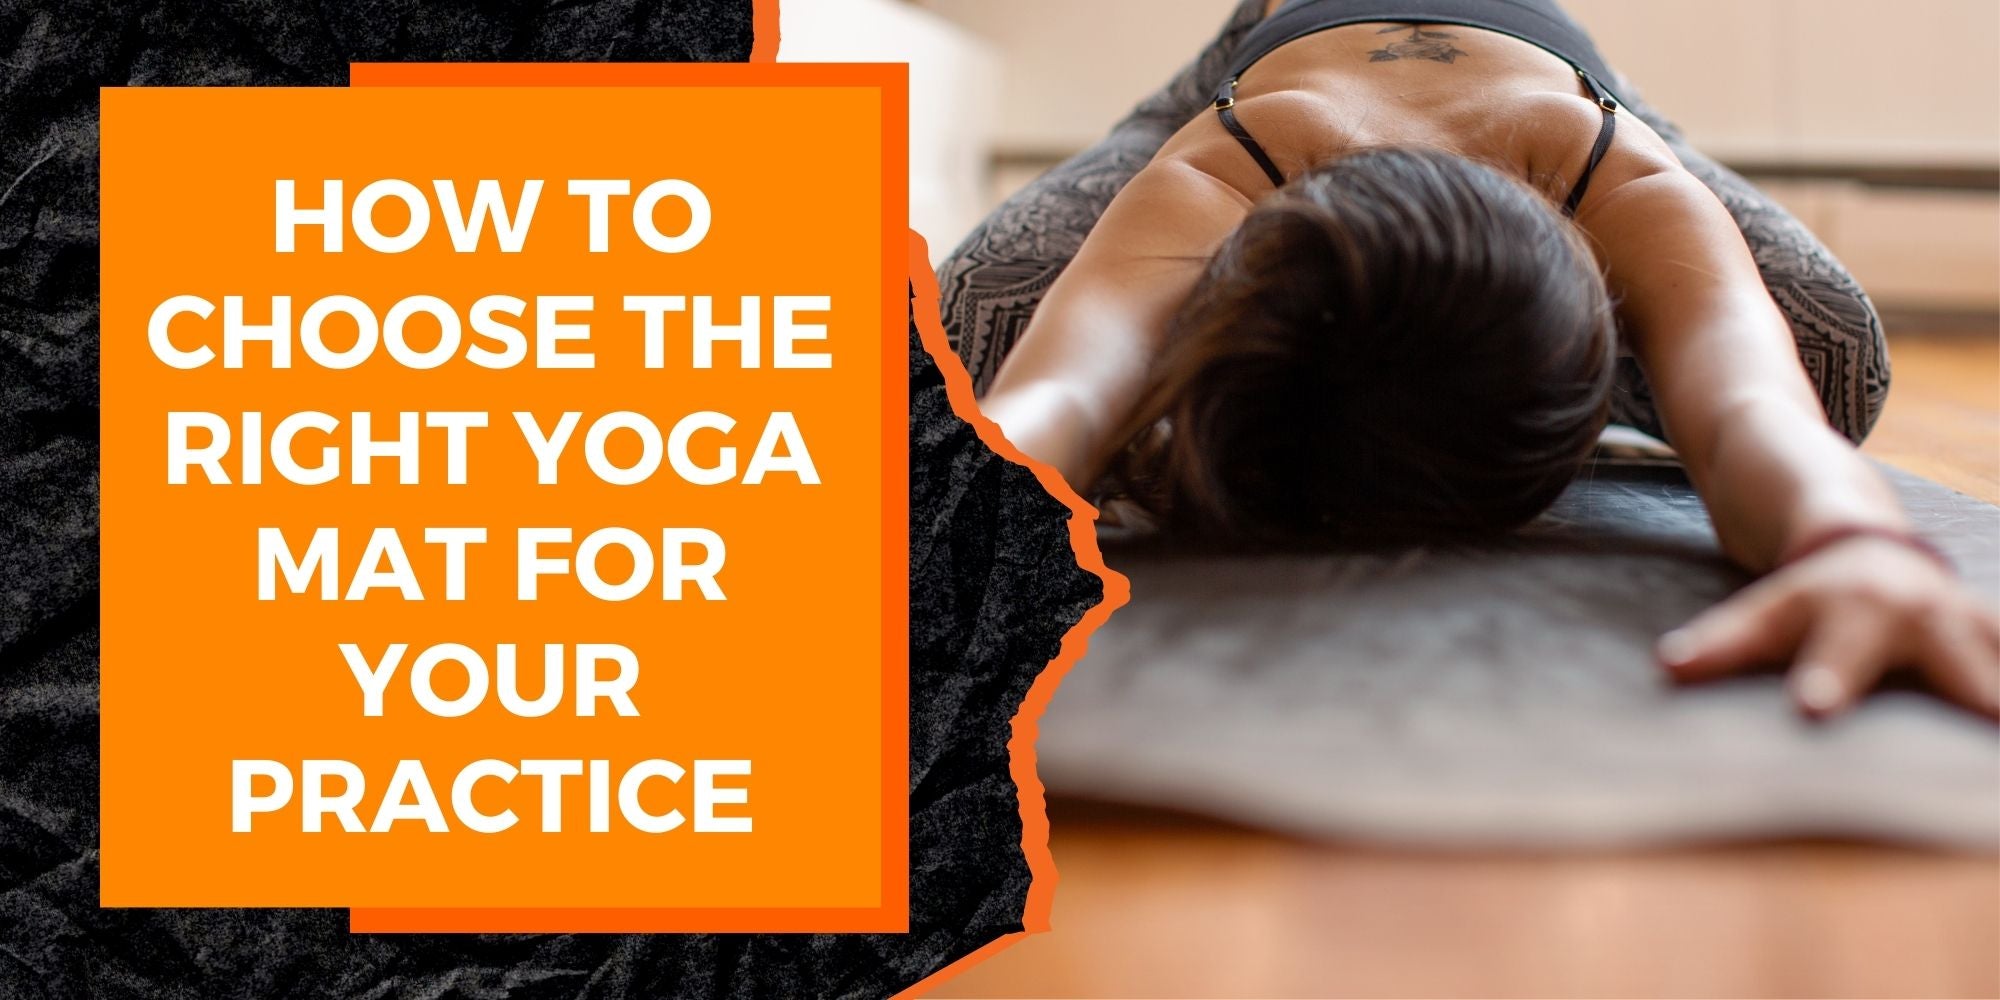 How to Choose the Right Yoga Mat for Your Practice